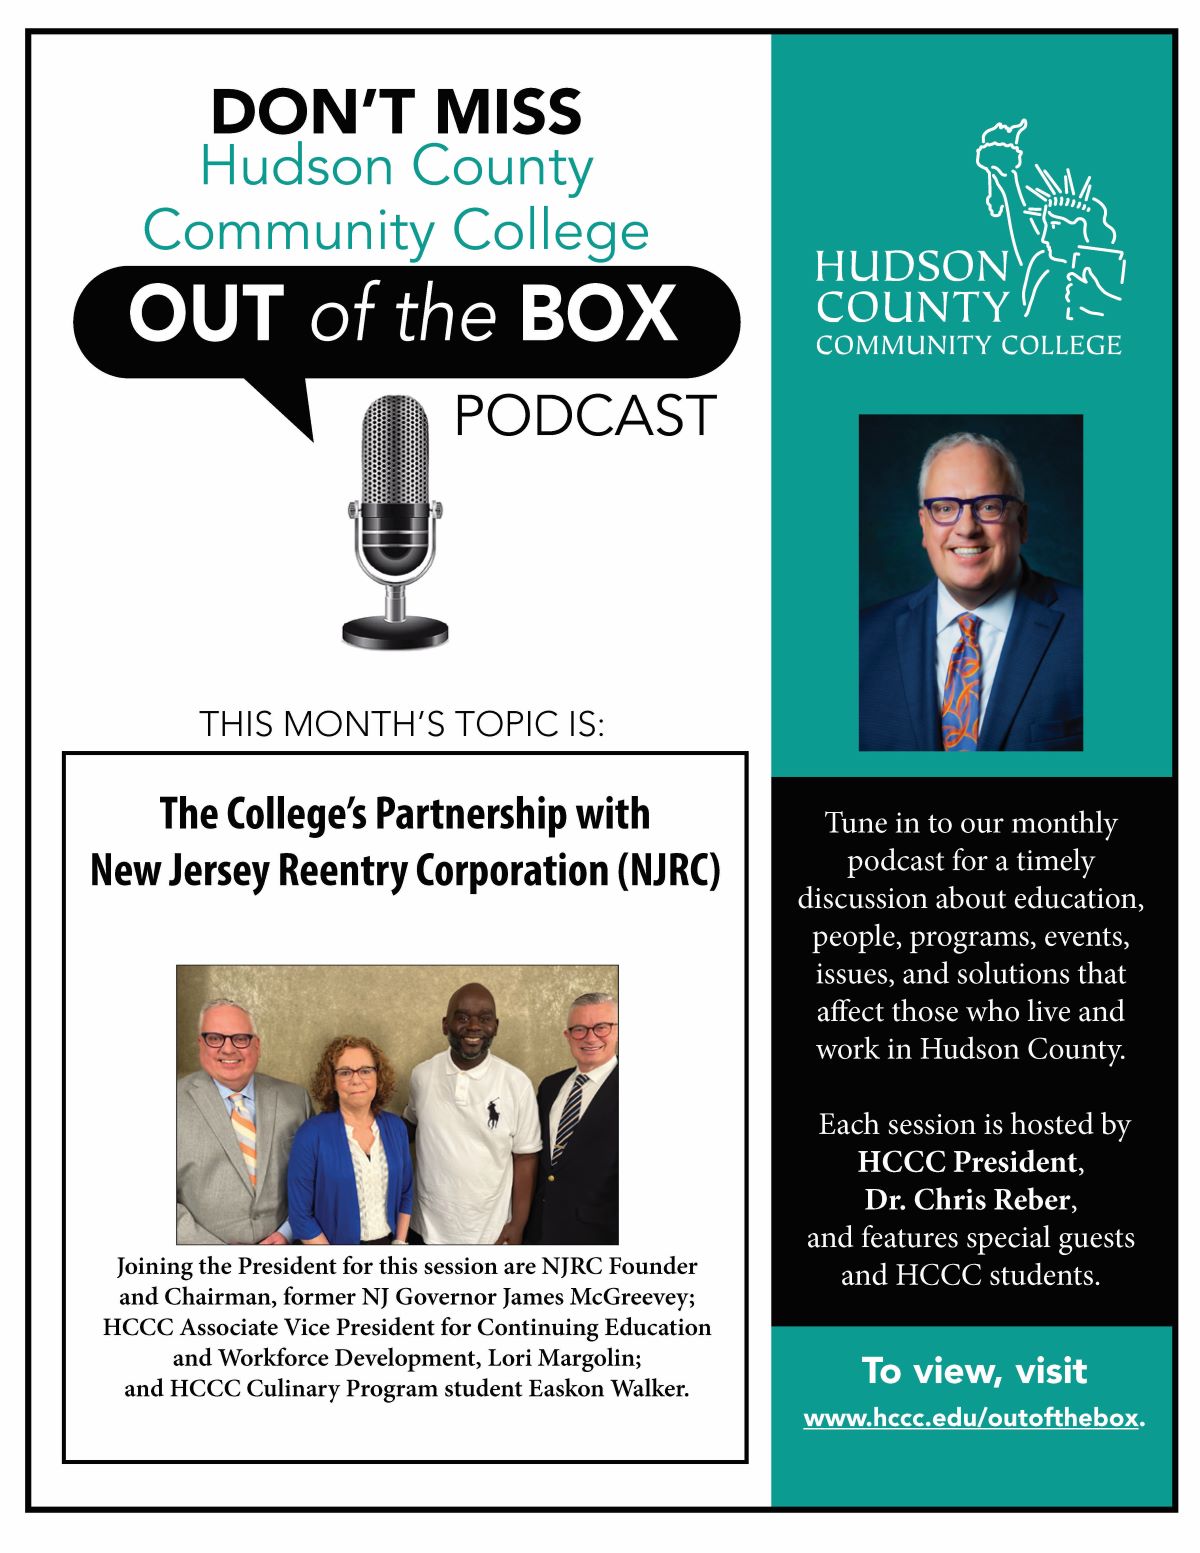 HCCC Out of the Box - The College’s Partnership with New Jersey Reentry Corporation (NJRC)